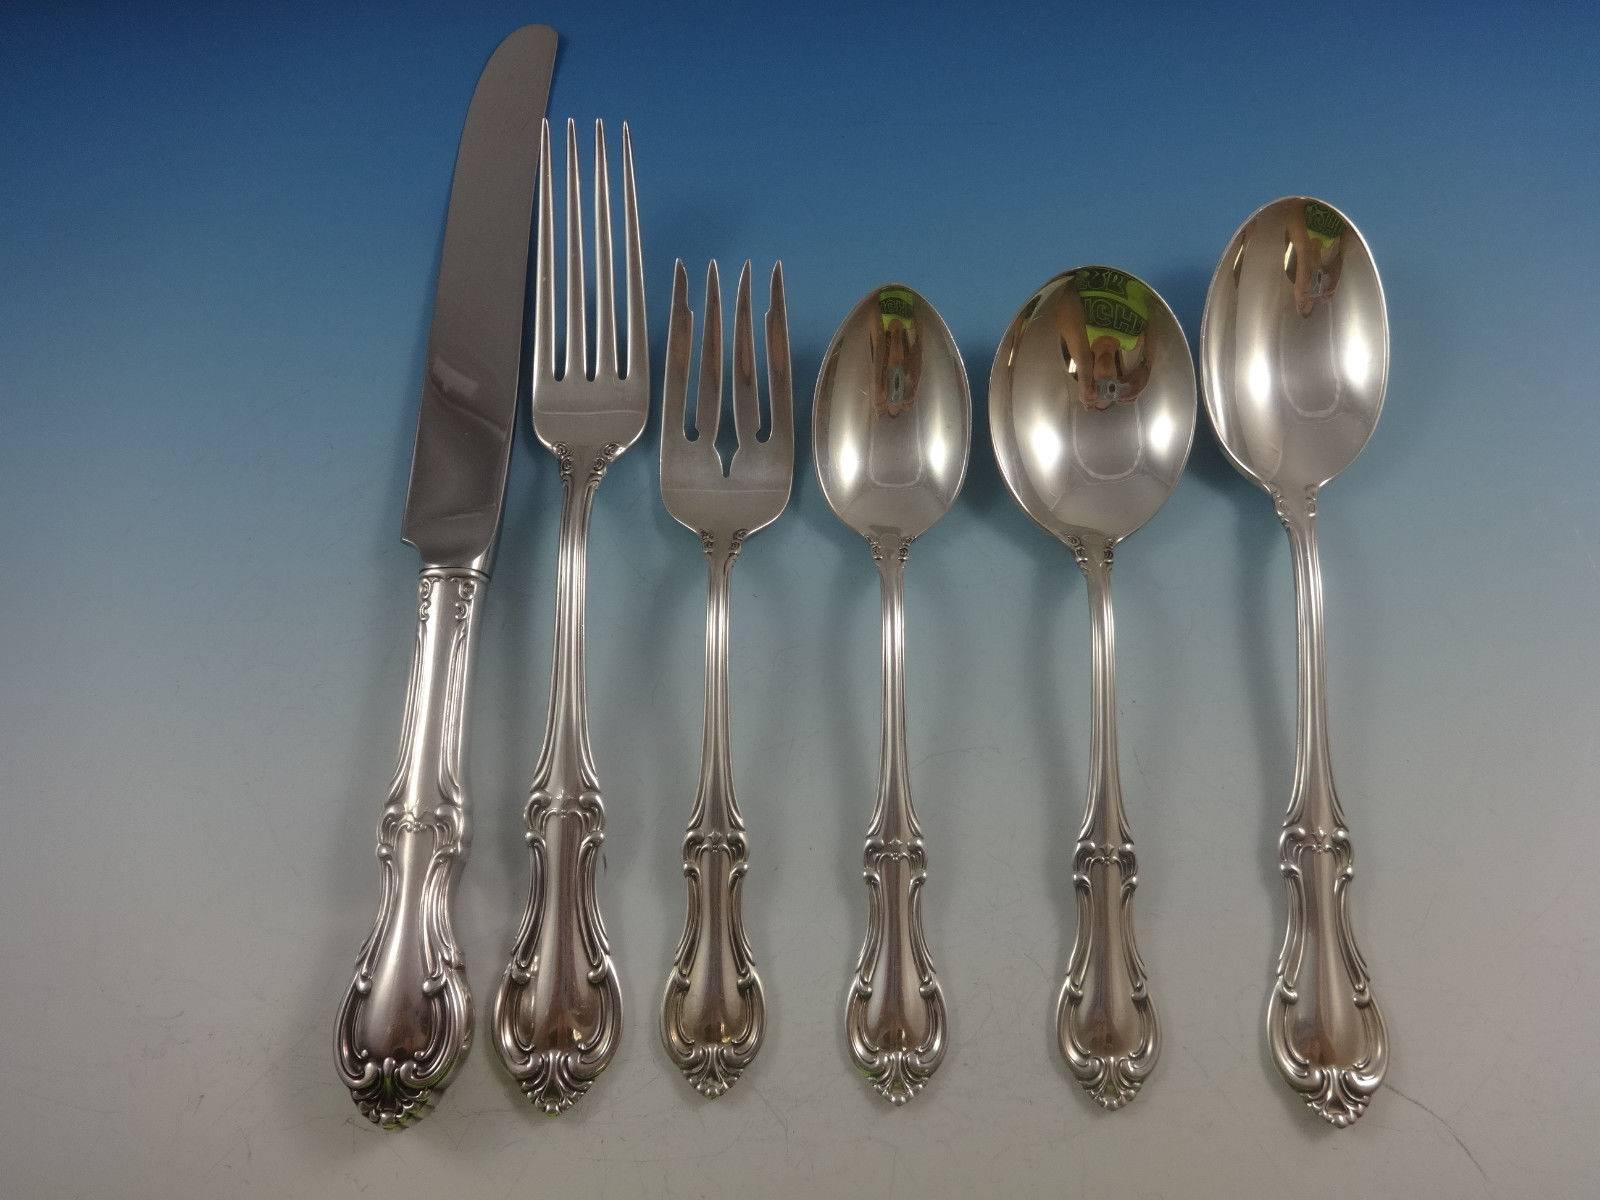 Inspired by the designs of the court of Louis XV, this sterling silver flatware pattern is as heroic and feminine as its namesake. Its traditional curves and contours are restrained by a modern touch, emphasizing the tapered slenderness of the